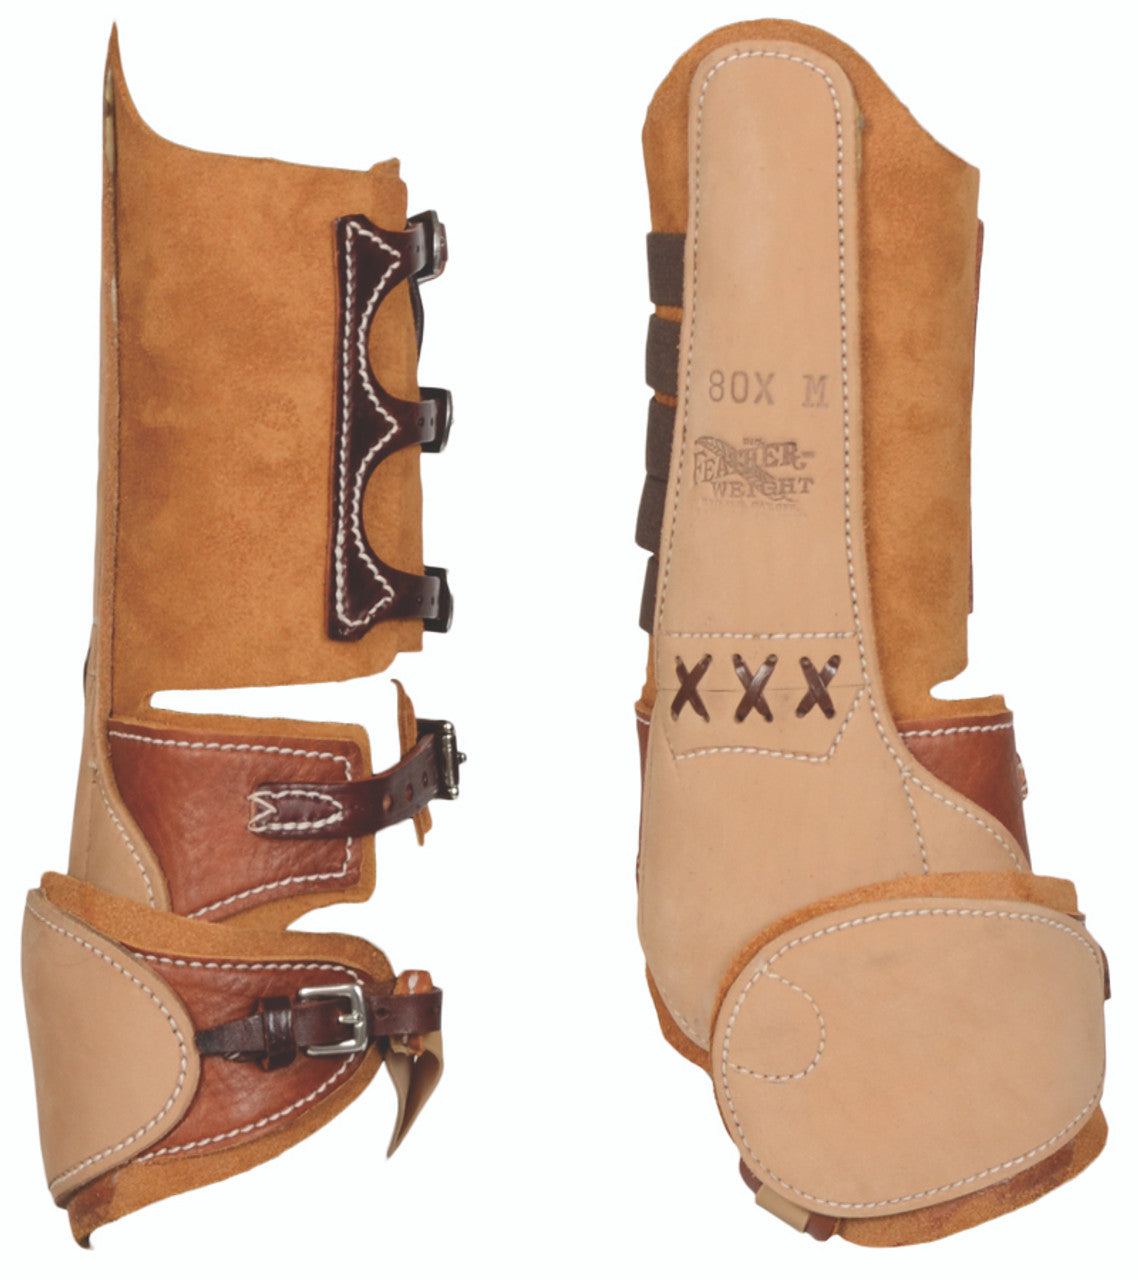 Feather-Weight® Hind, Shin & Ankle Boots with Speedy Cut-TexanSaddles.com